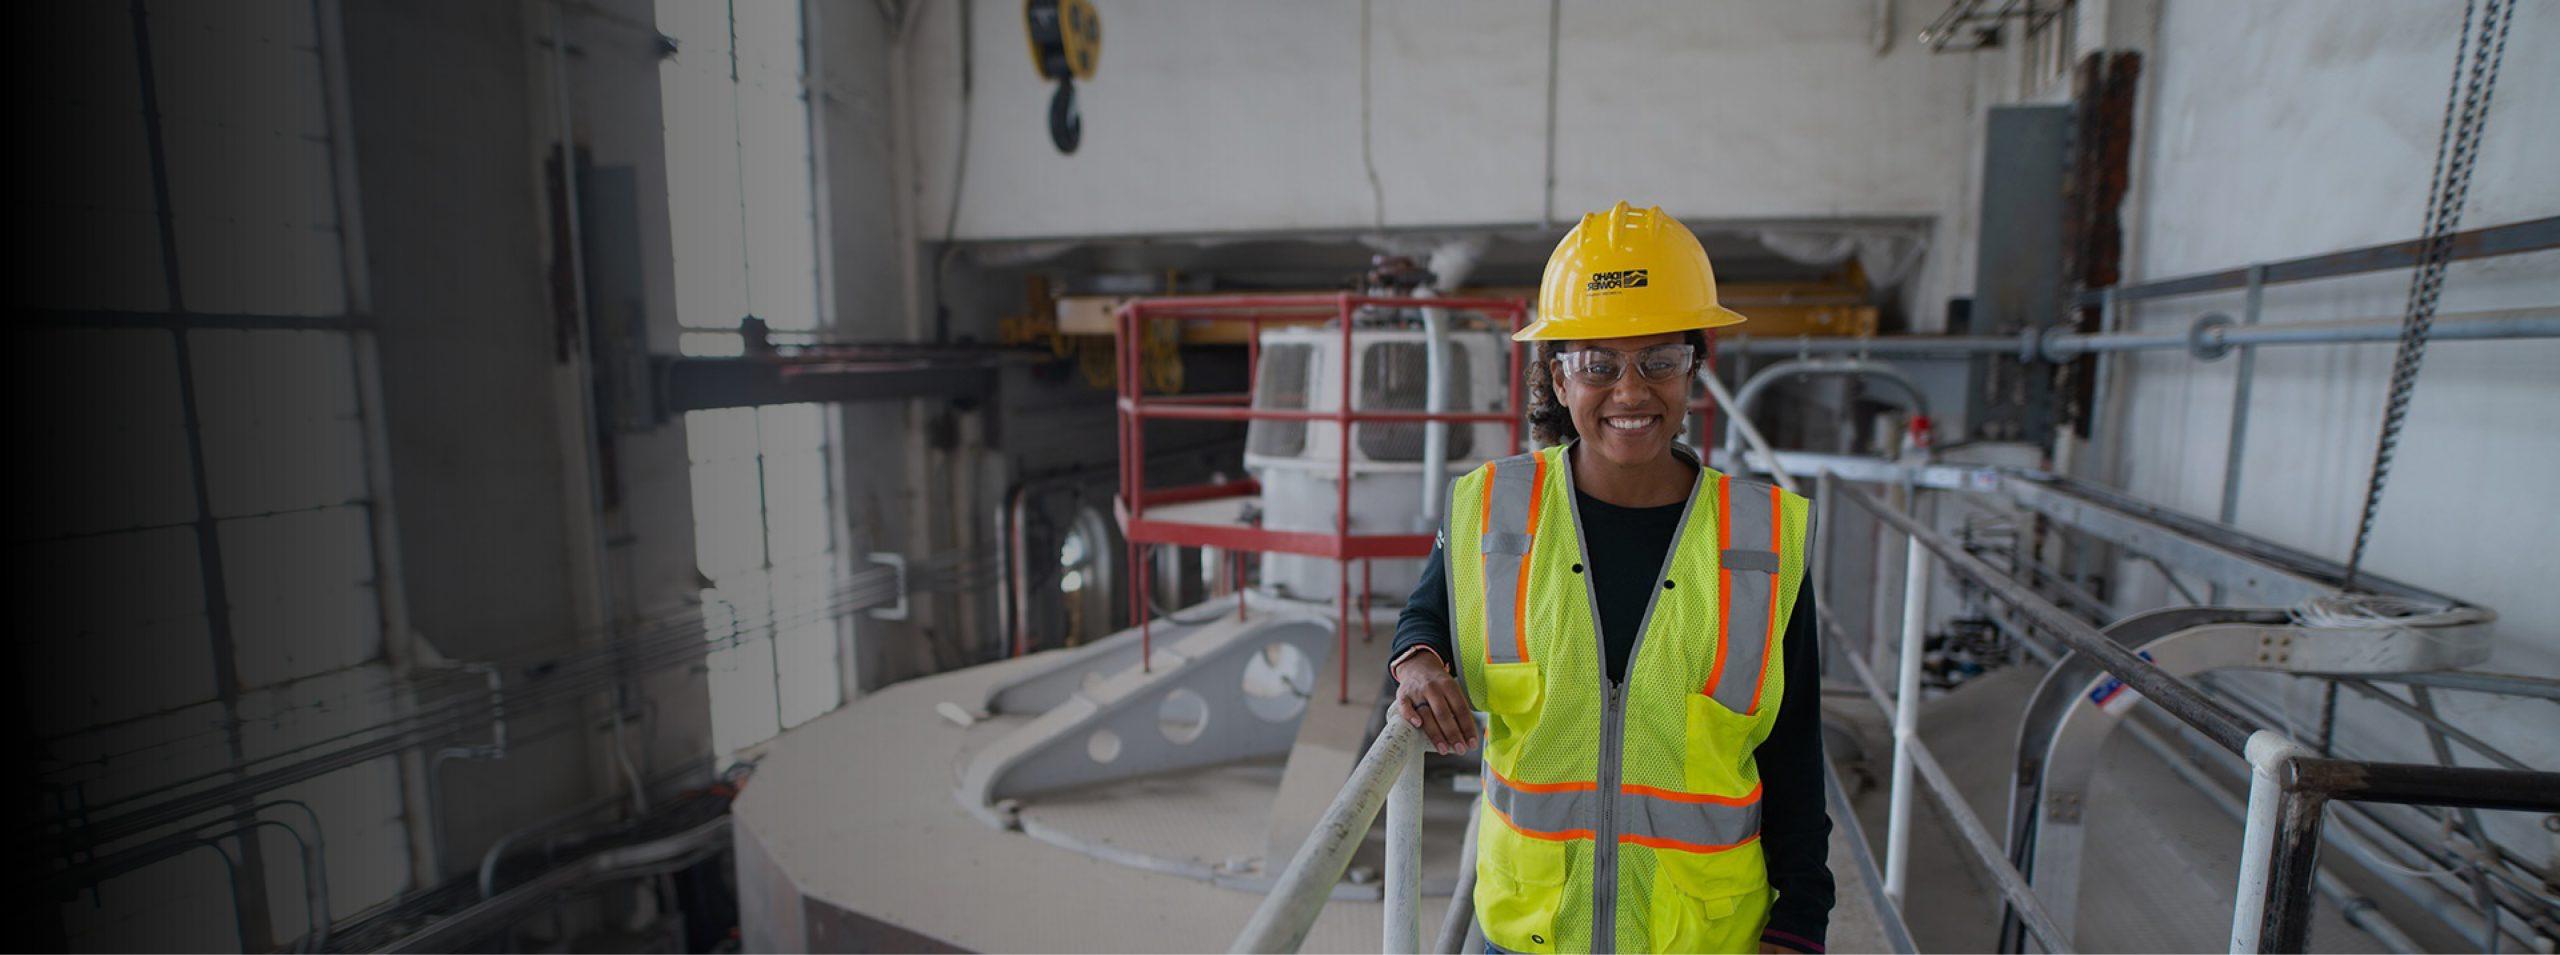 Image of an Idaho Power female engineer in a power plant